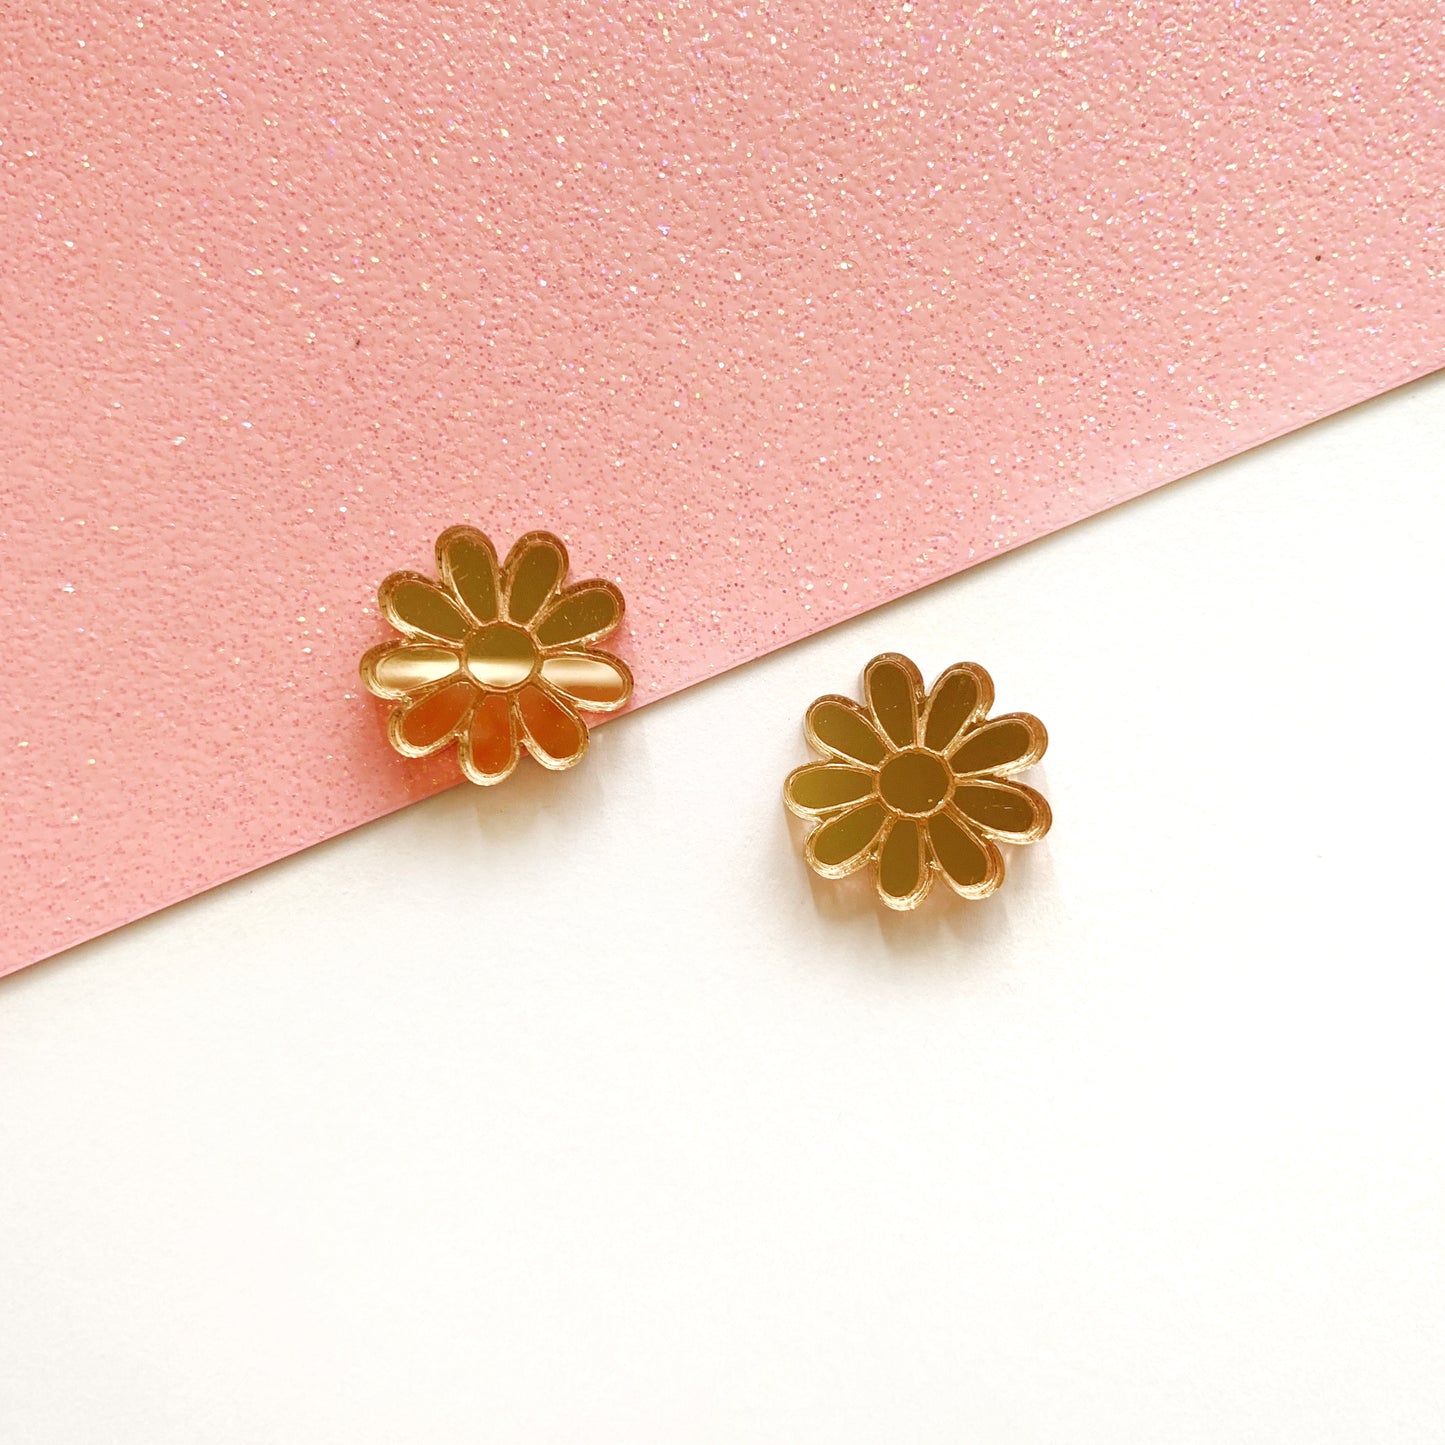 15mm Engraved Daisy studs